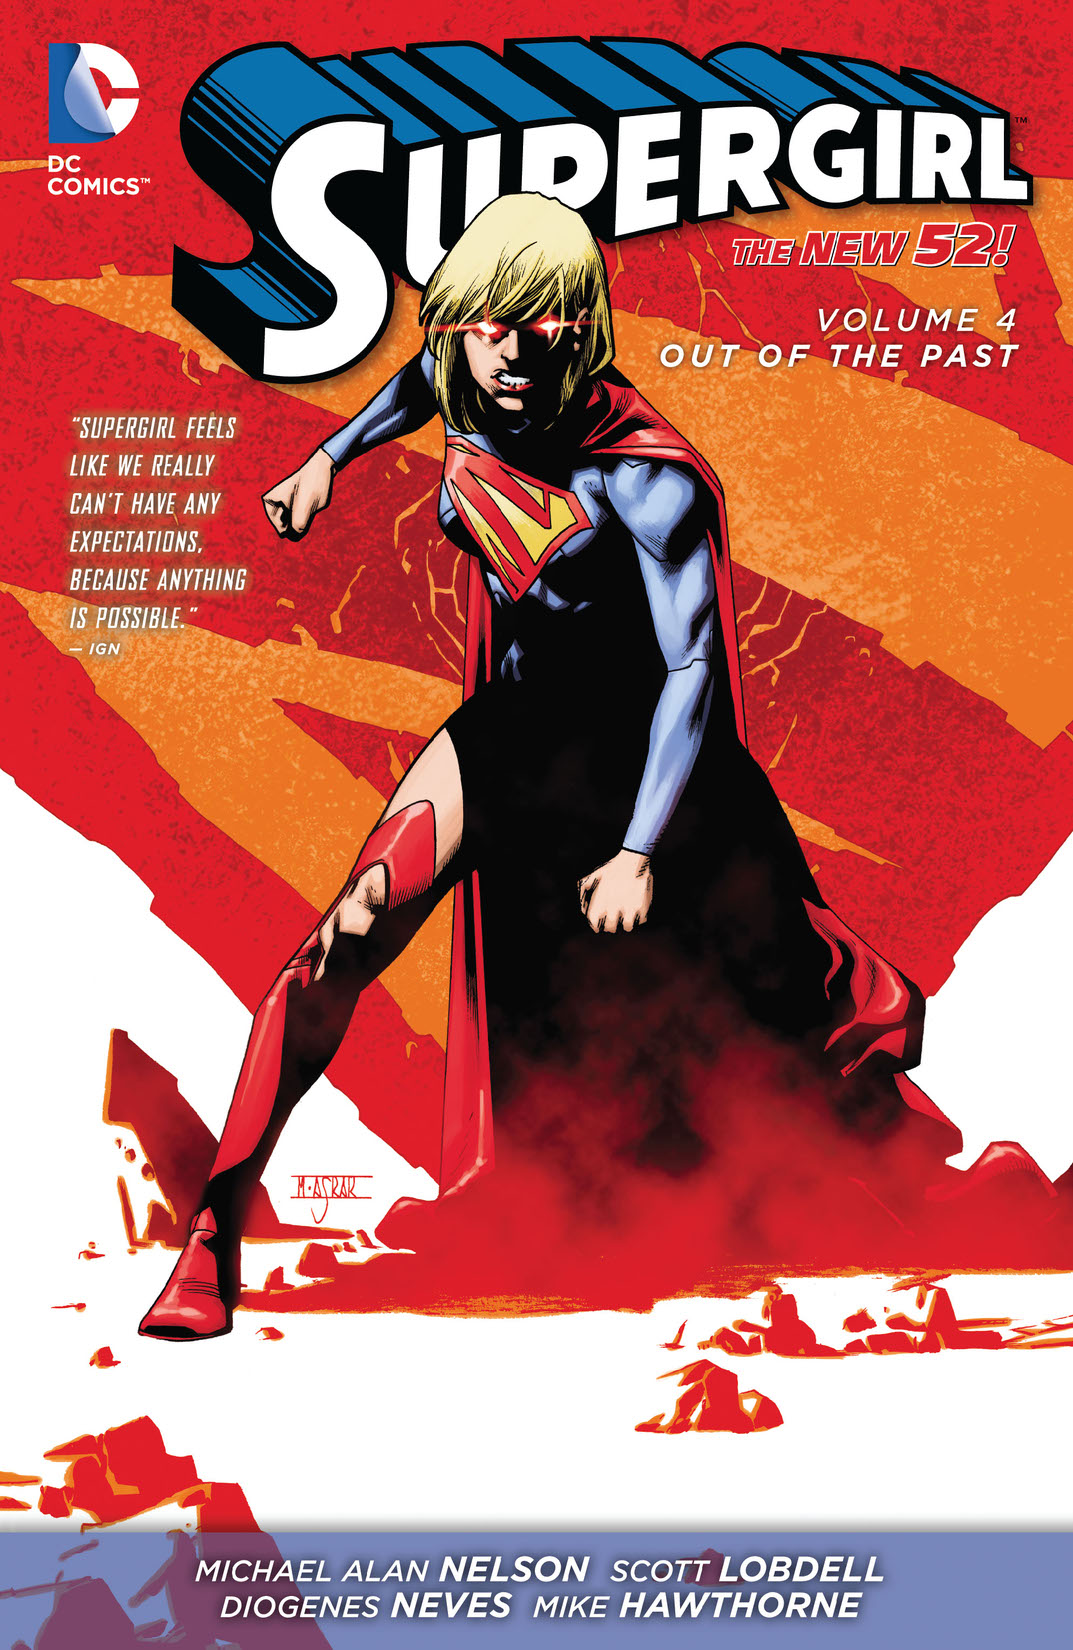 Supergirl Vol. 4: Out of the Past preview images